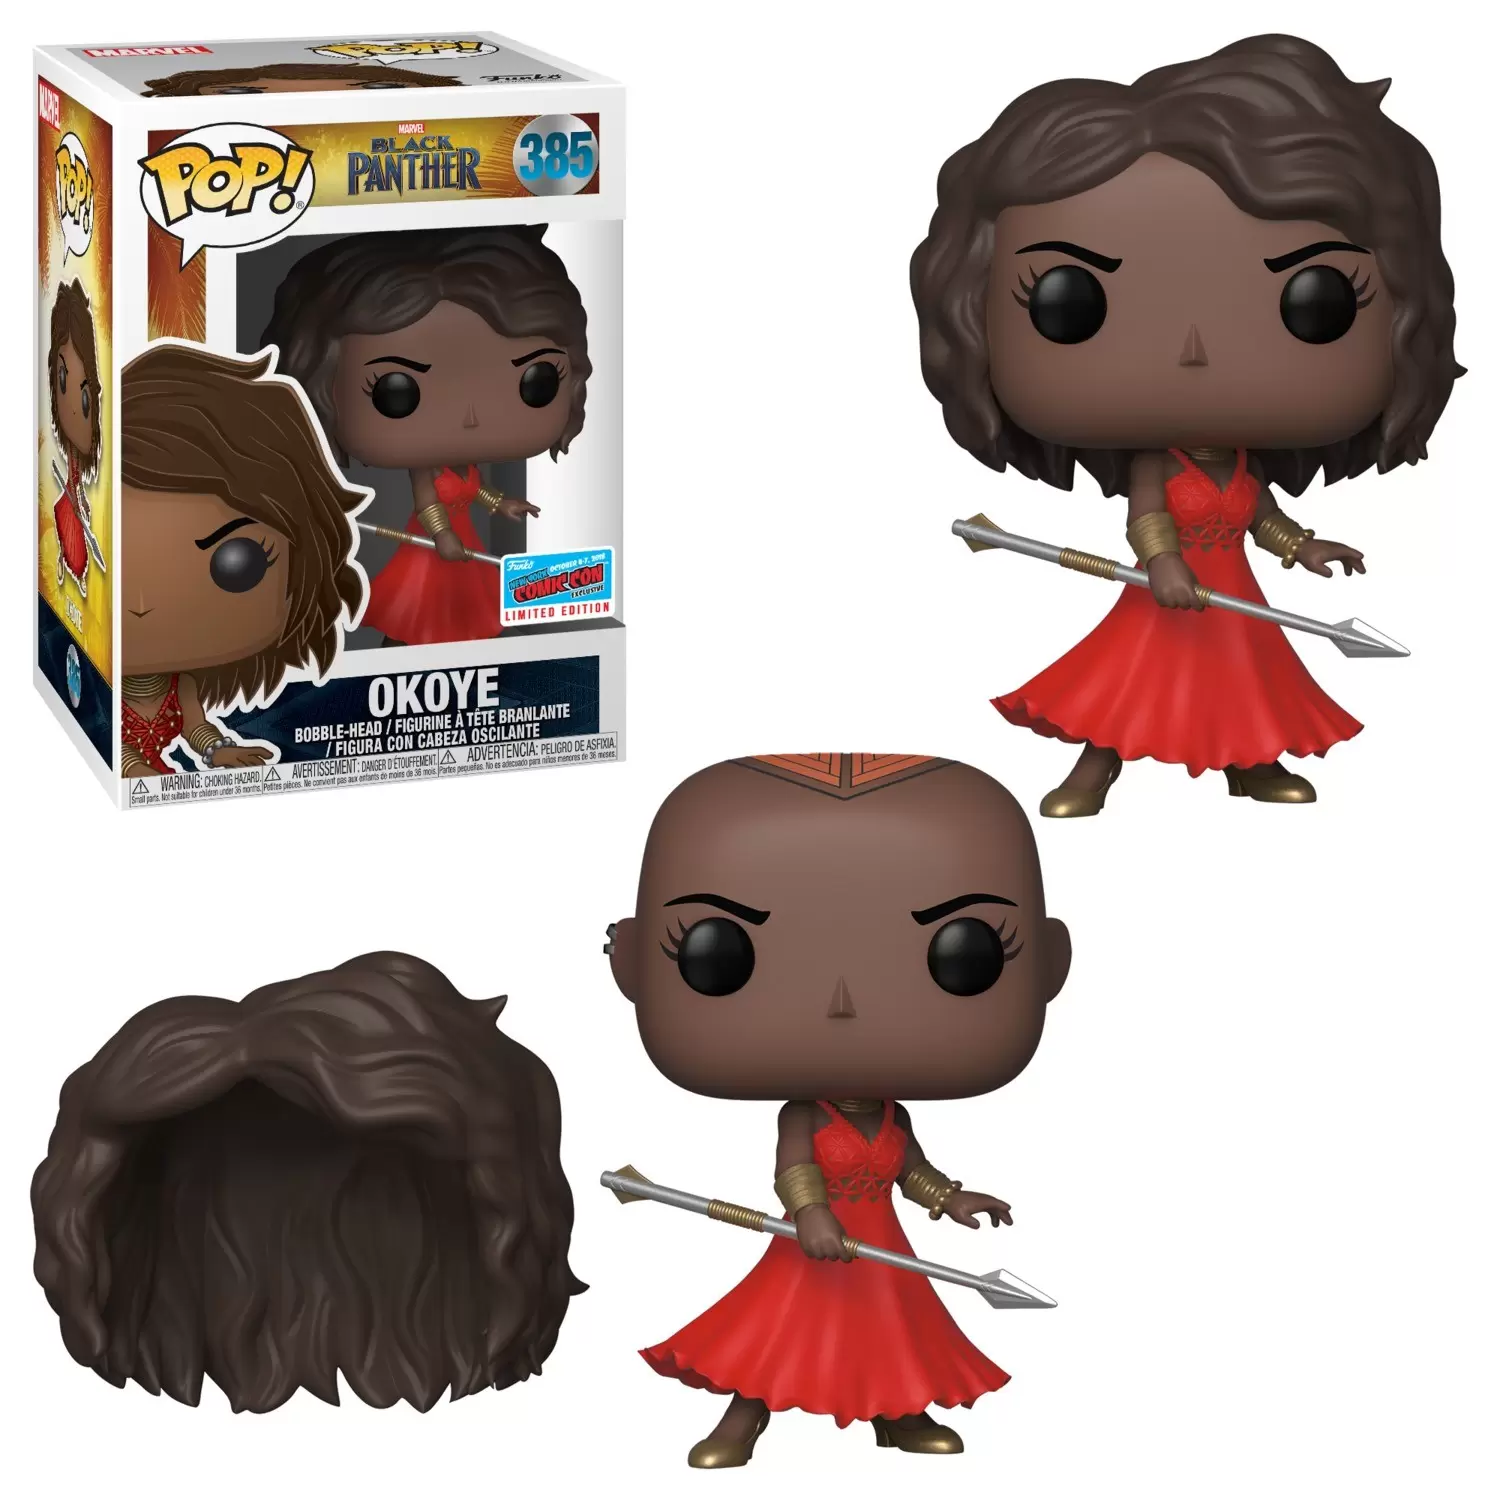 POP! MARVEL - Black Panther - Okoye with Red Dress